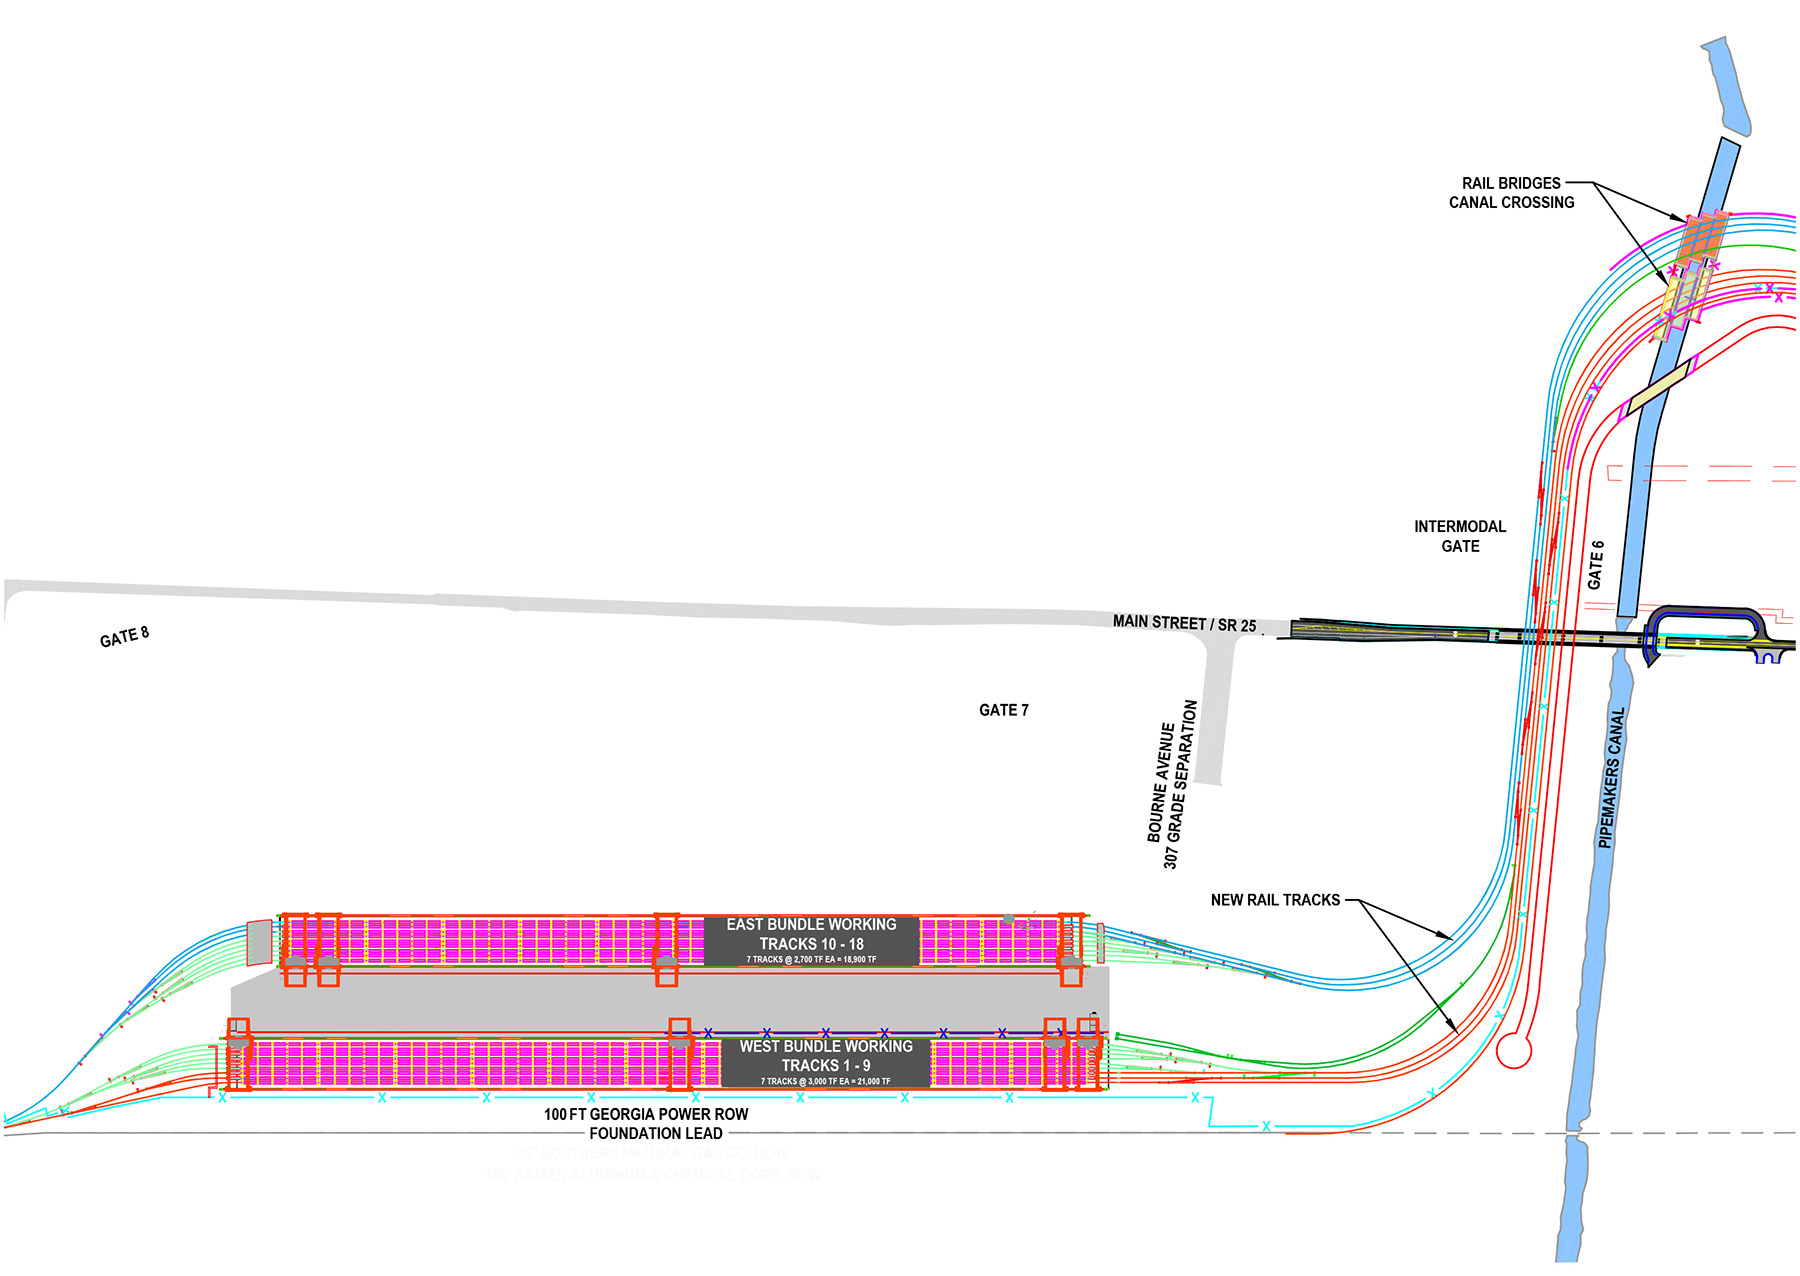 Drawing of a portion of a rail yard including the new tracks, intermodal gate, and the foundation lead.